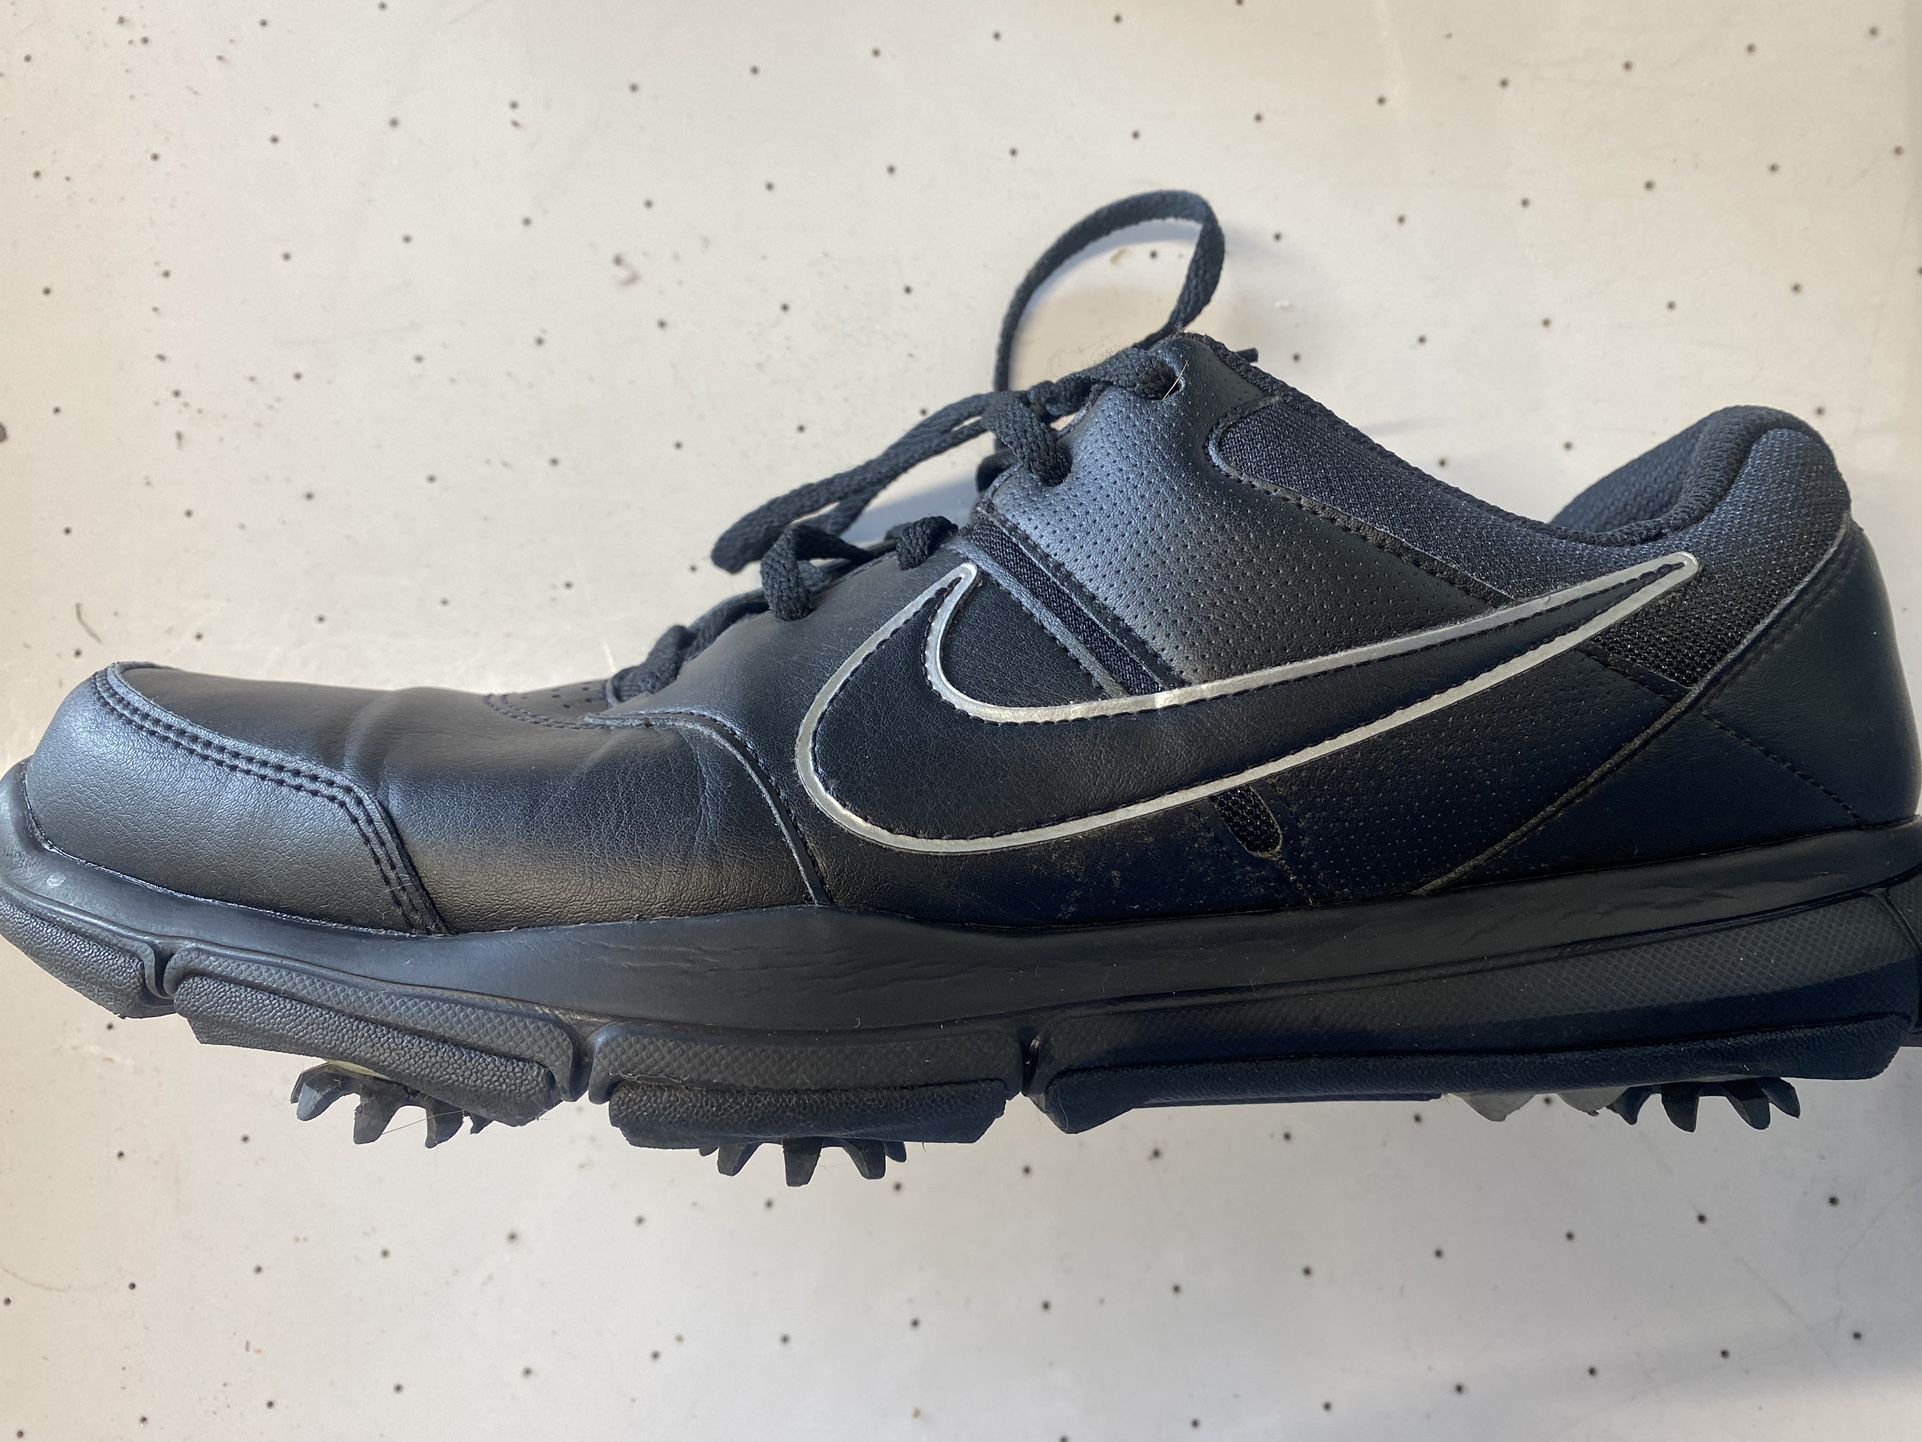 Nike Golf shoes Size 10.5